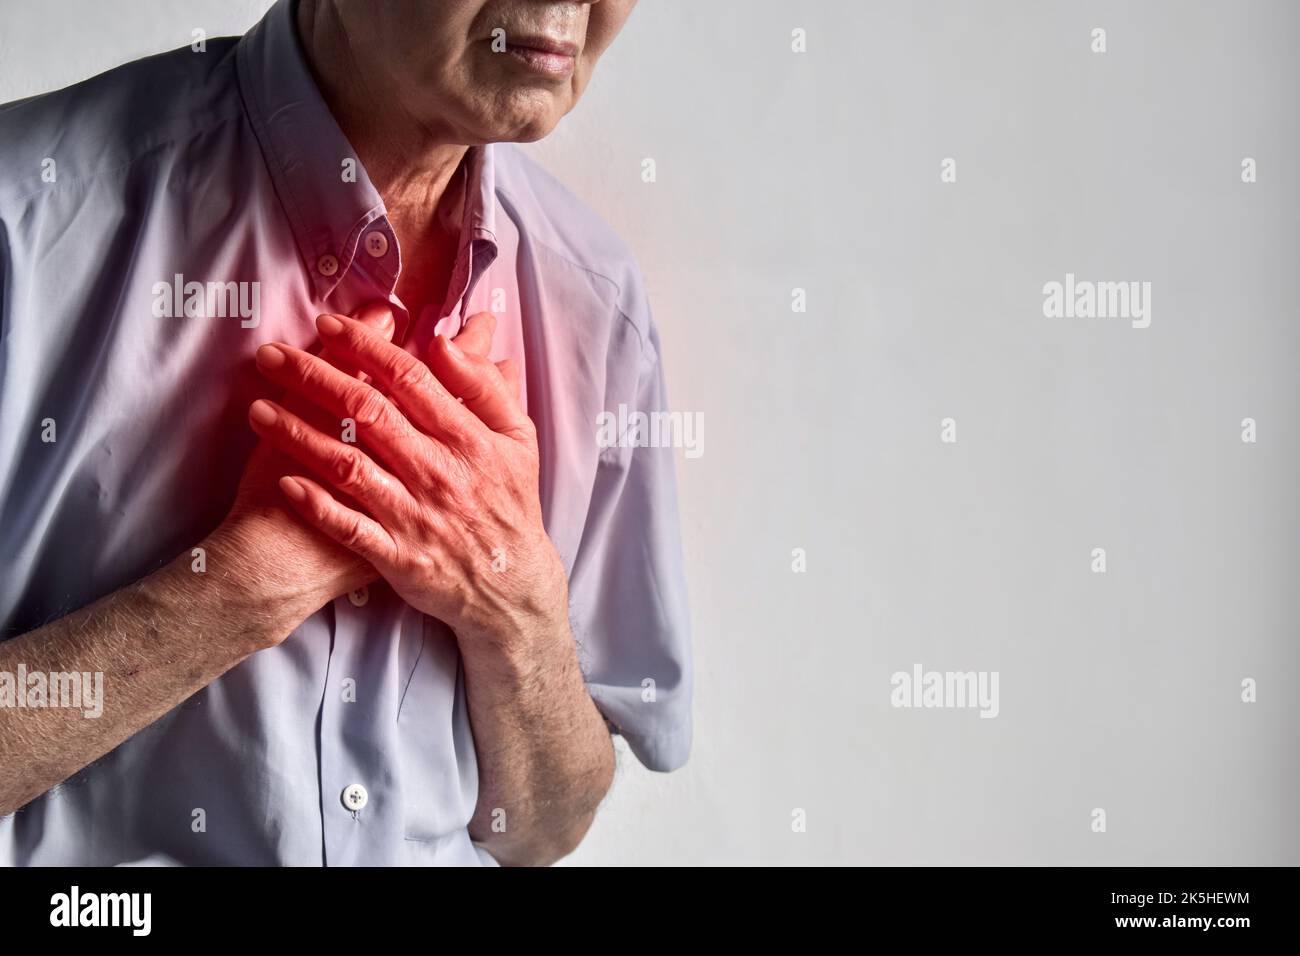 Asian elder man suffering from central chest pain. Chest pain can be caused by heart attack, myocardial infarct or ischemia, myocarditis, pneumonia, o Stock Photo